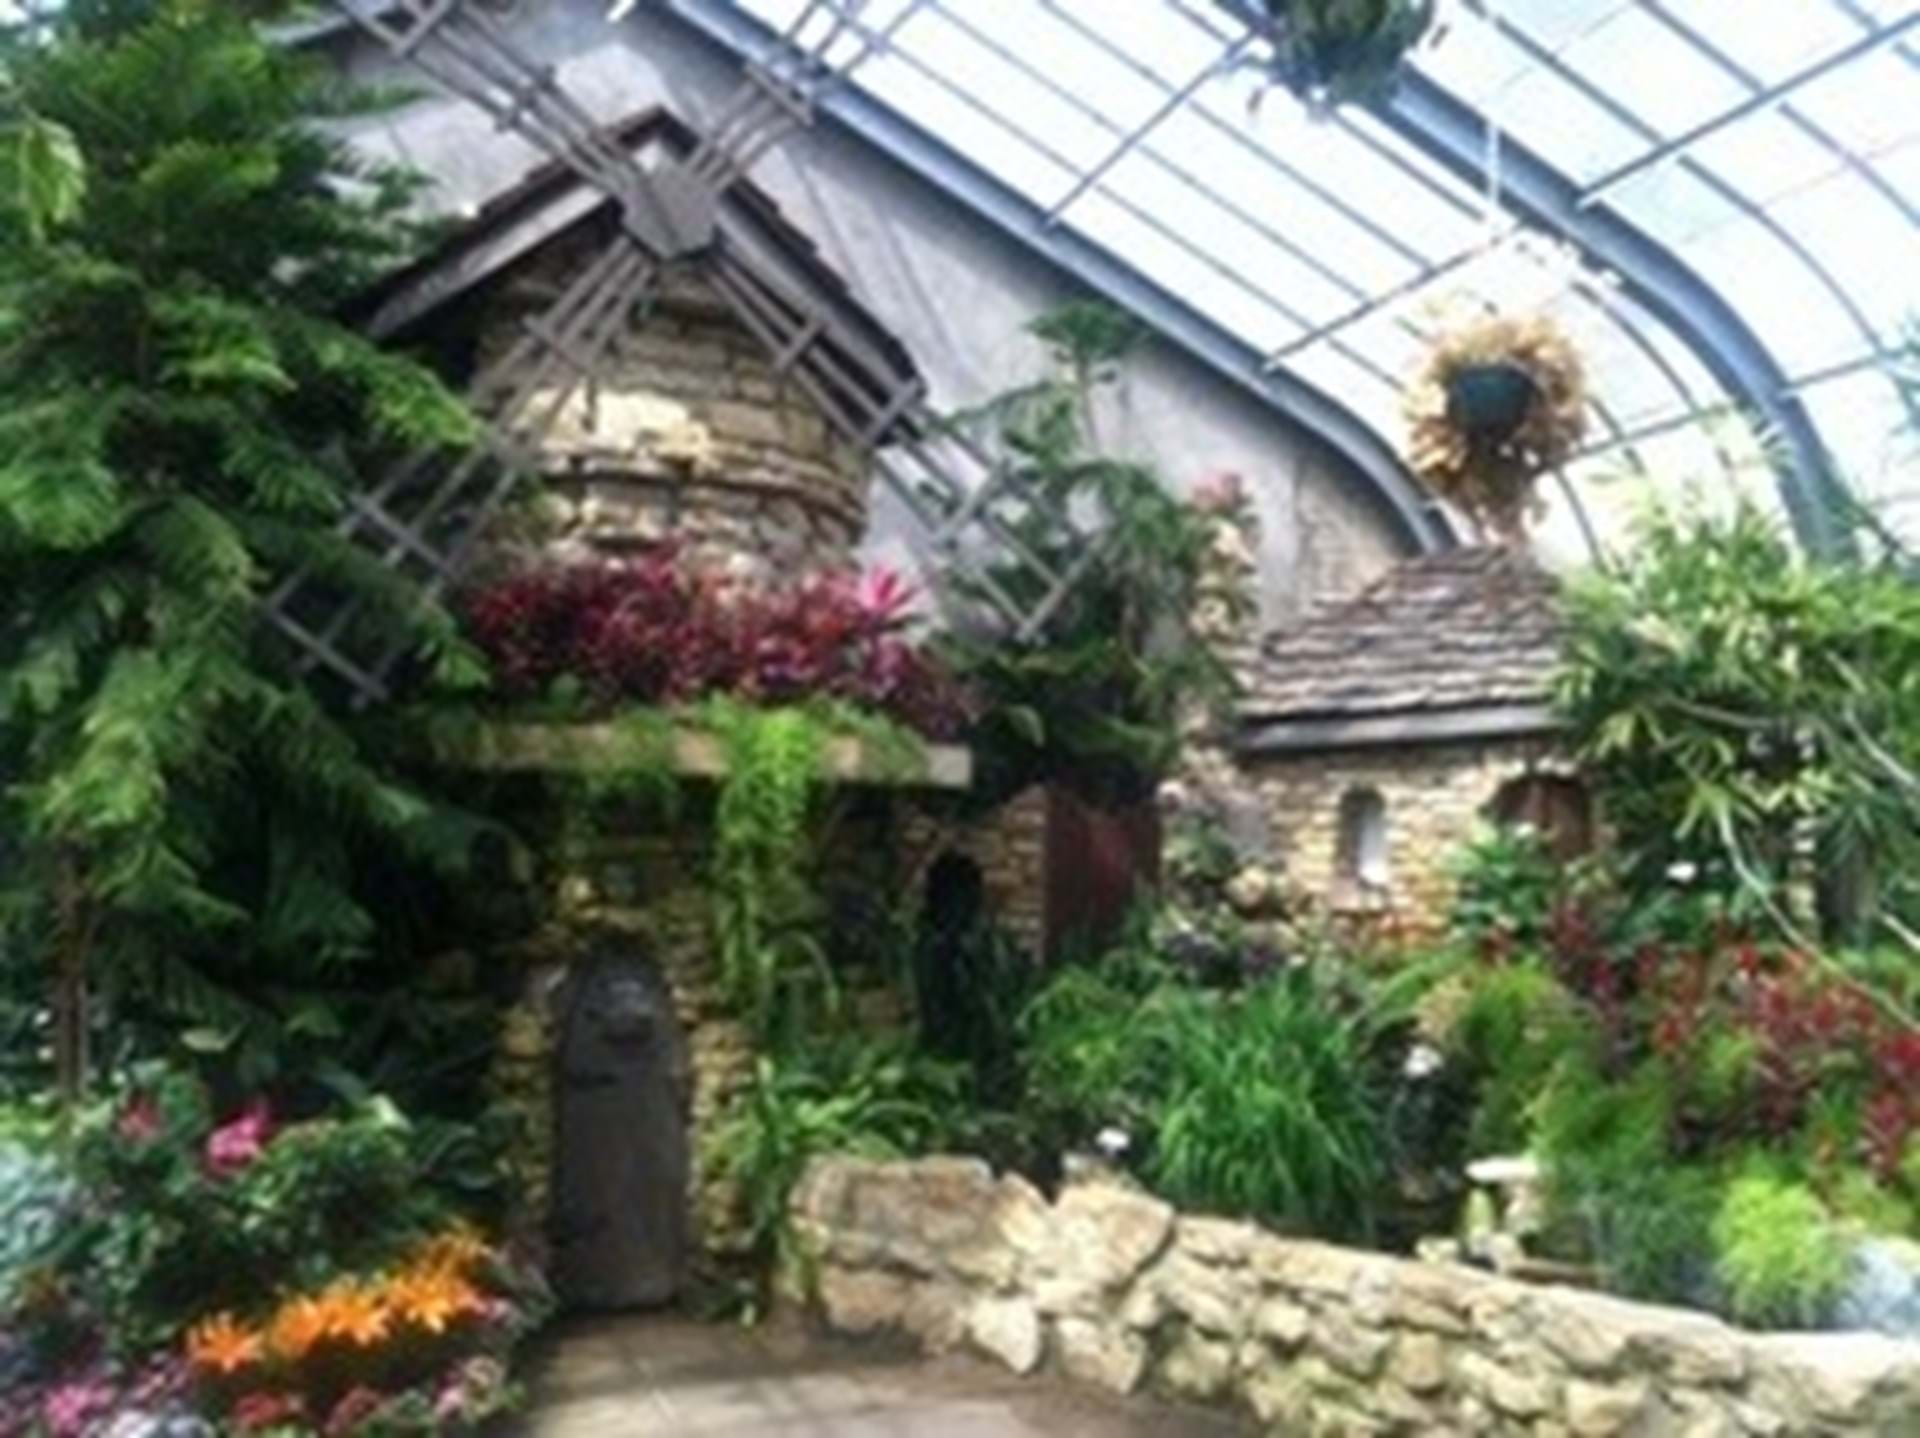 Interior view of Conservatory